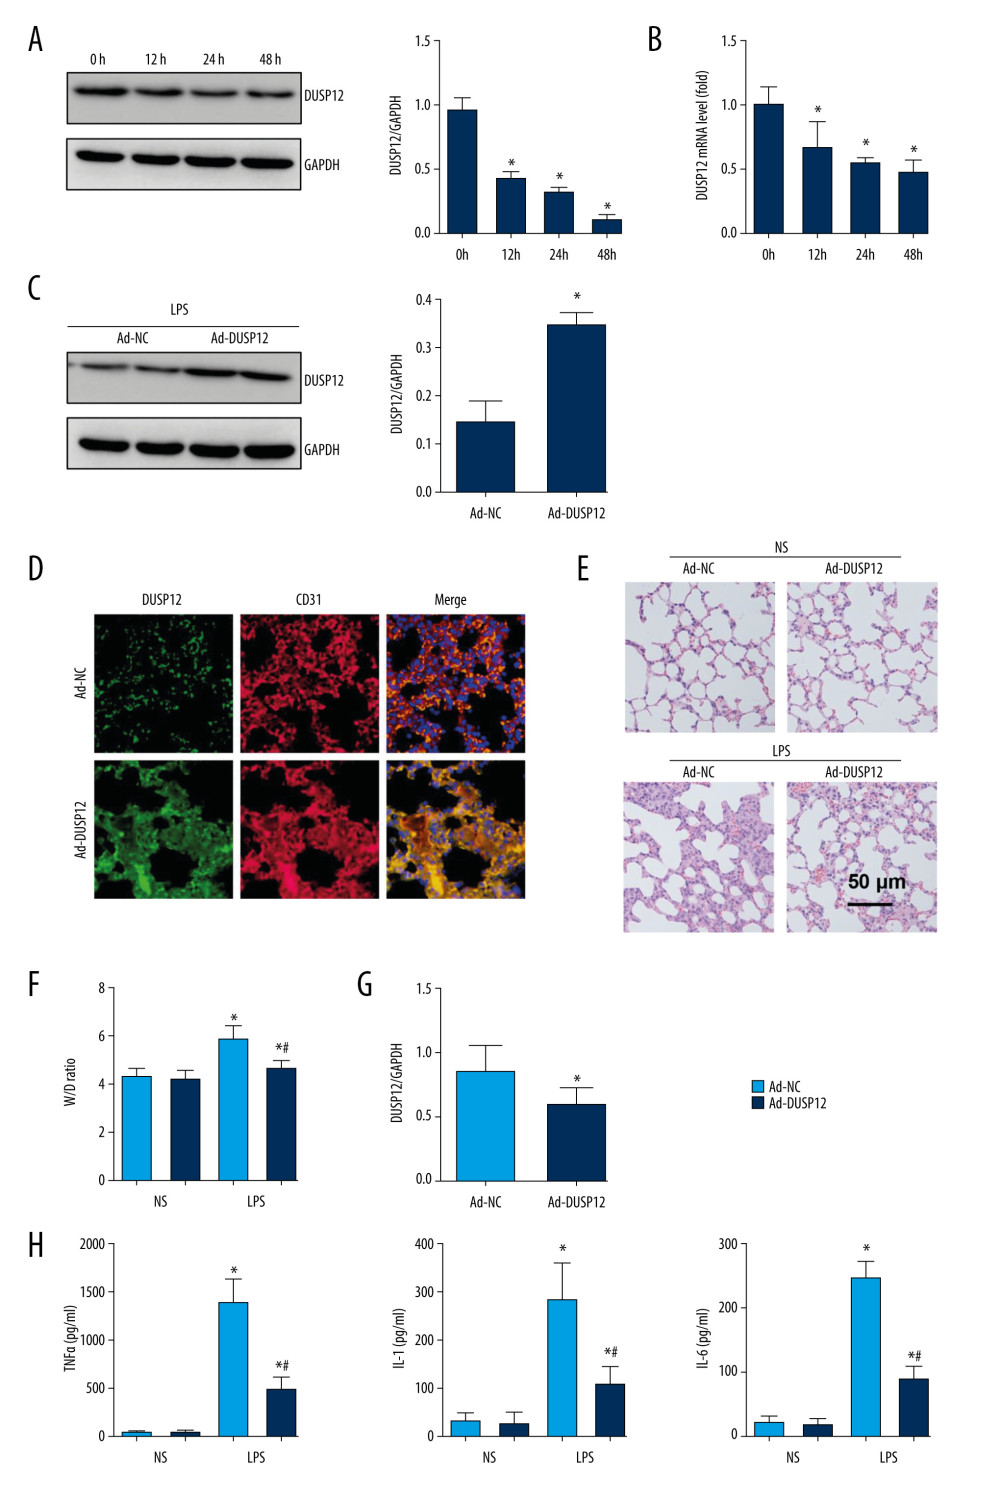 DUSP12 suppressed LPS-induced lung injury in mice. (A, B) DUSP12 protein and mRNA levels in lung tissue after treatment with lipopolysaccharide (LPS) (* P<0.05 vs 0 h). (C) Protein level of DUSP12 in mouse lung tissue 42 h after Ad-DUSP12 injection (n=6). (D) Immunofluorescence staining of CD31 and DUSP12 after Ad-DUSP12 injection (n=5, magnification: 400). (E) Hematoxylin and eosin (H&E) staining (n=5, magnification: 200). (F) Lung wet weight/dry weight ratio (W/D ratio) (n=10). (G) Lung injury score (n=6). (H) Proinflammatory factor levels in alveolar lavage fluid as measured by ELISA (n=6). (* P<0.05 vs Ad-NC/NS; # P<0.05 vs Ad-NC/LPS).